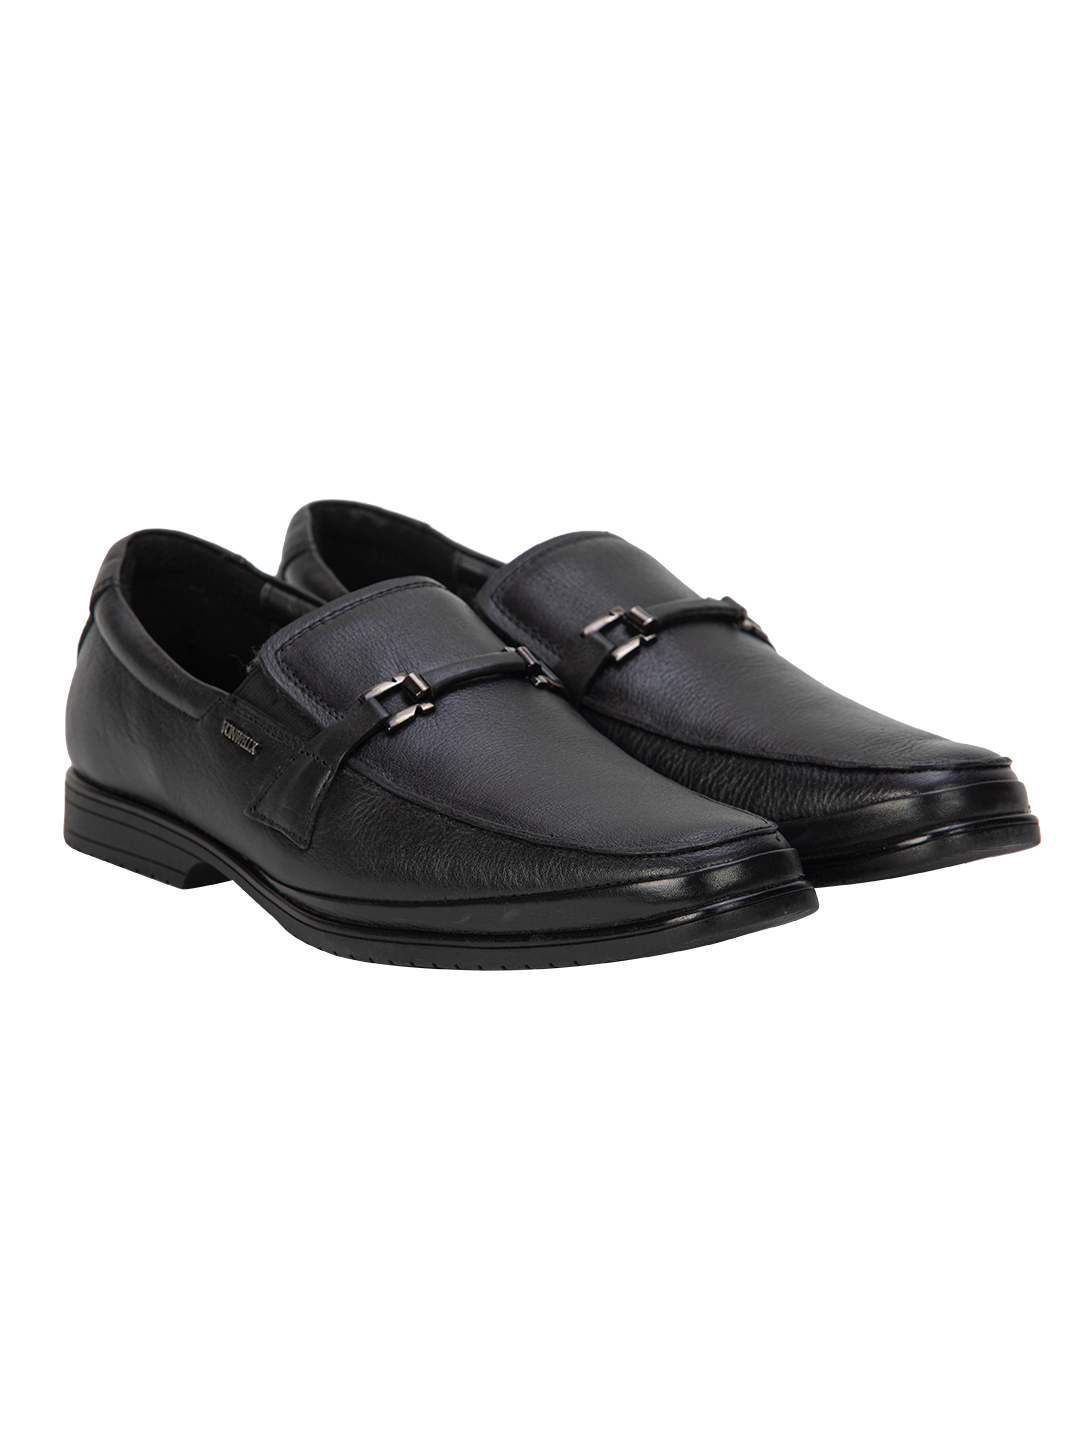 Buy Von Wellx Germany Comfort Black Jace Shoes Online in Kandy